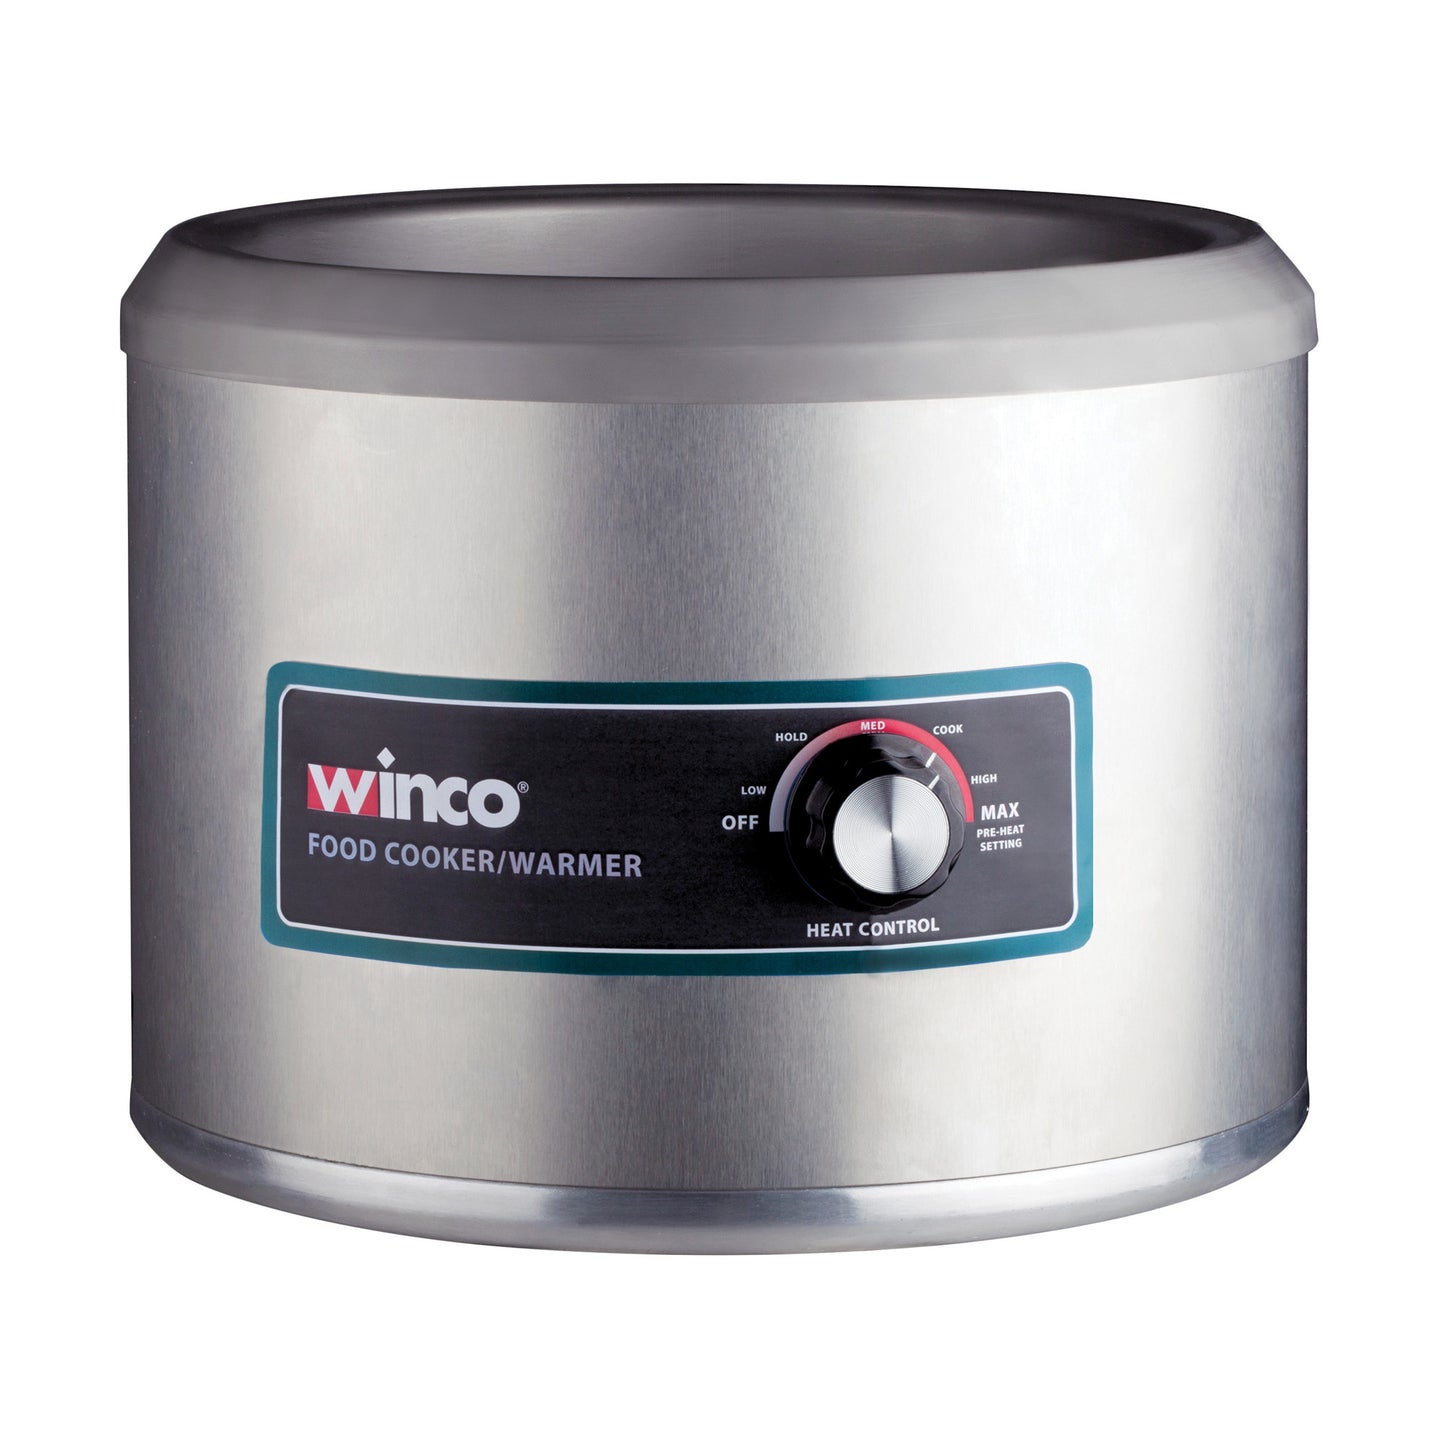 FW-11R500 - 11 Quart Electric Round Food Cooker/Warmer, 1250W